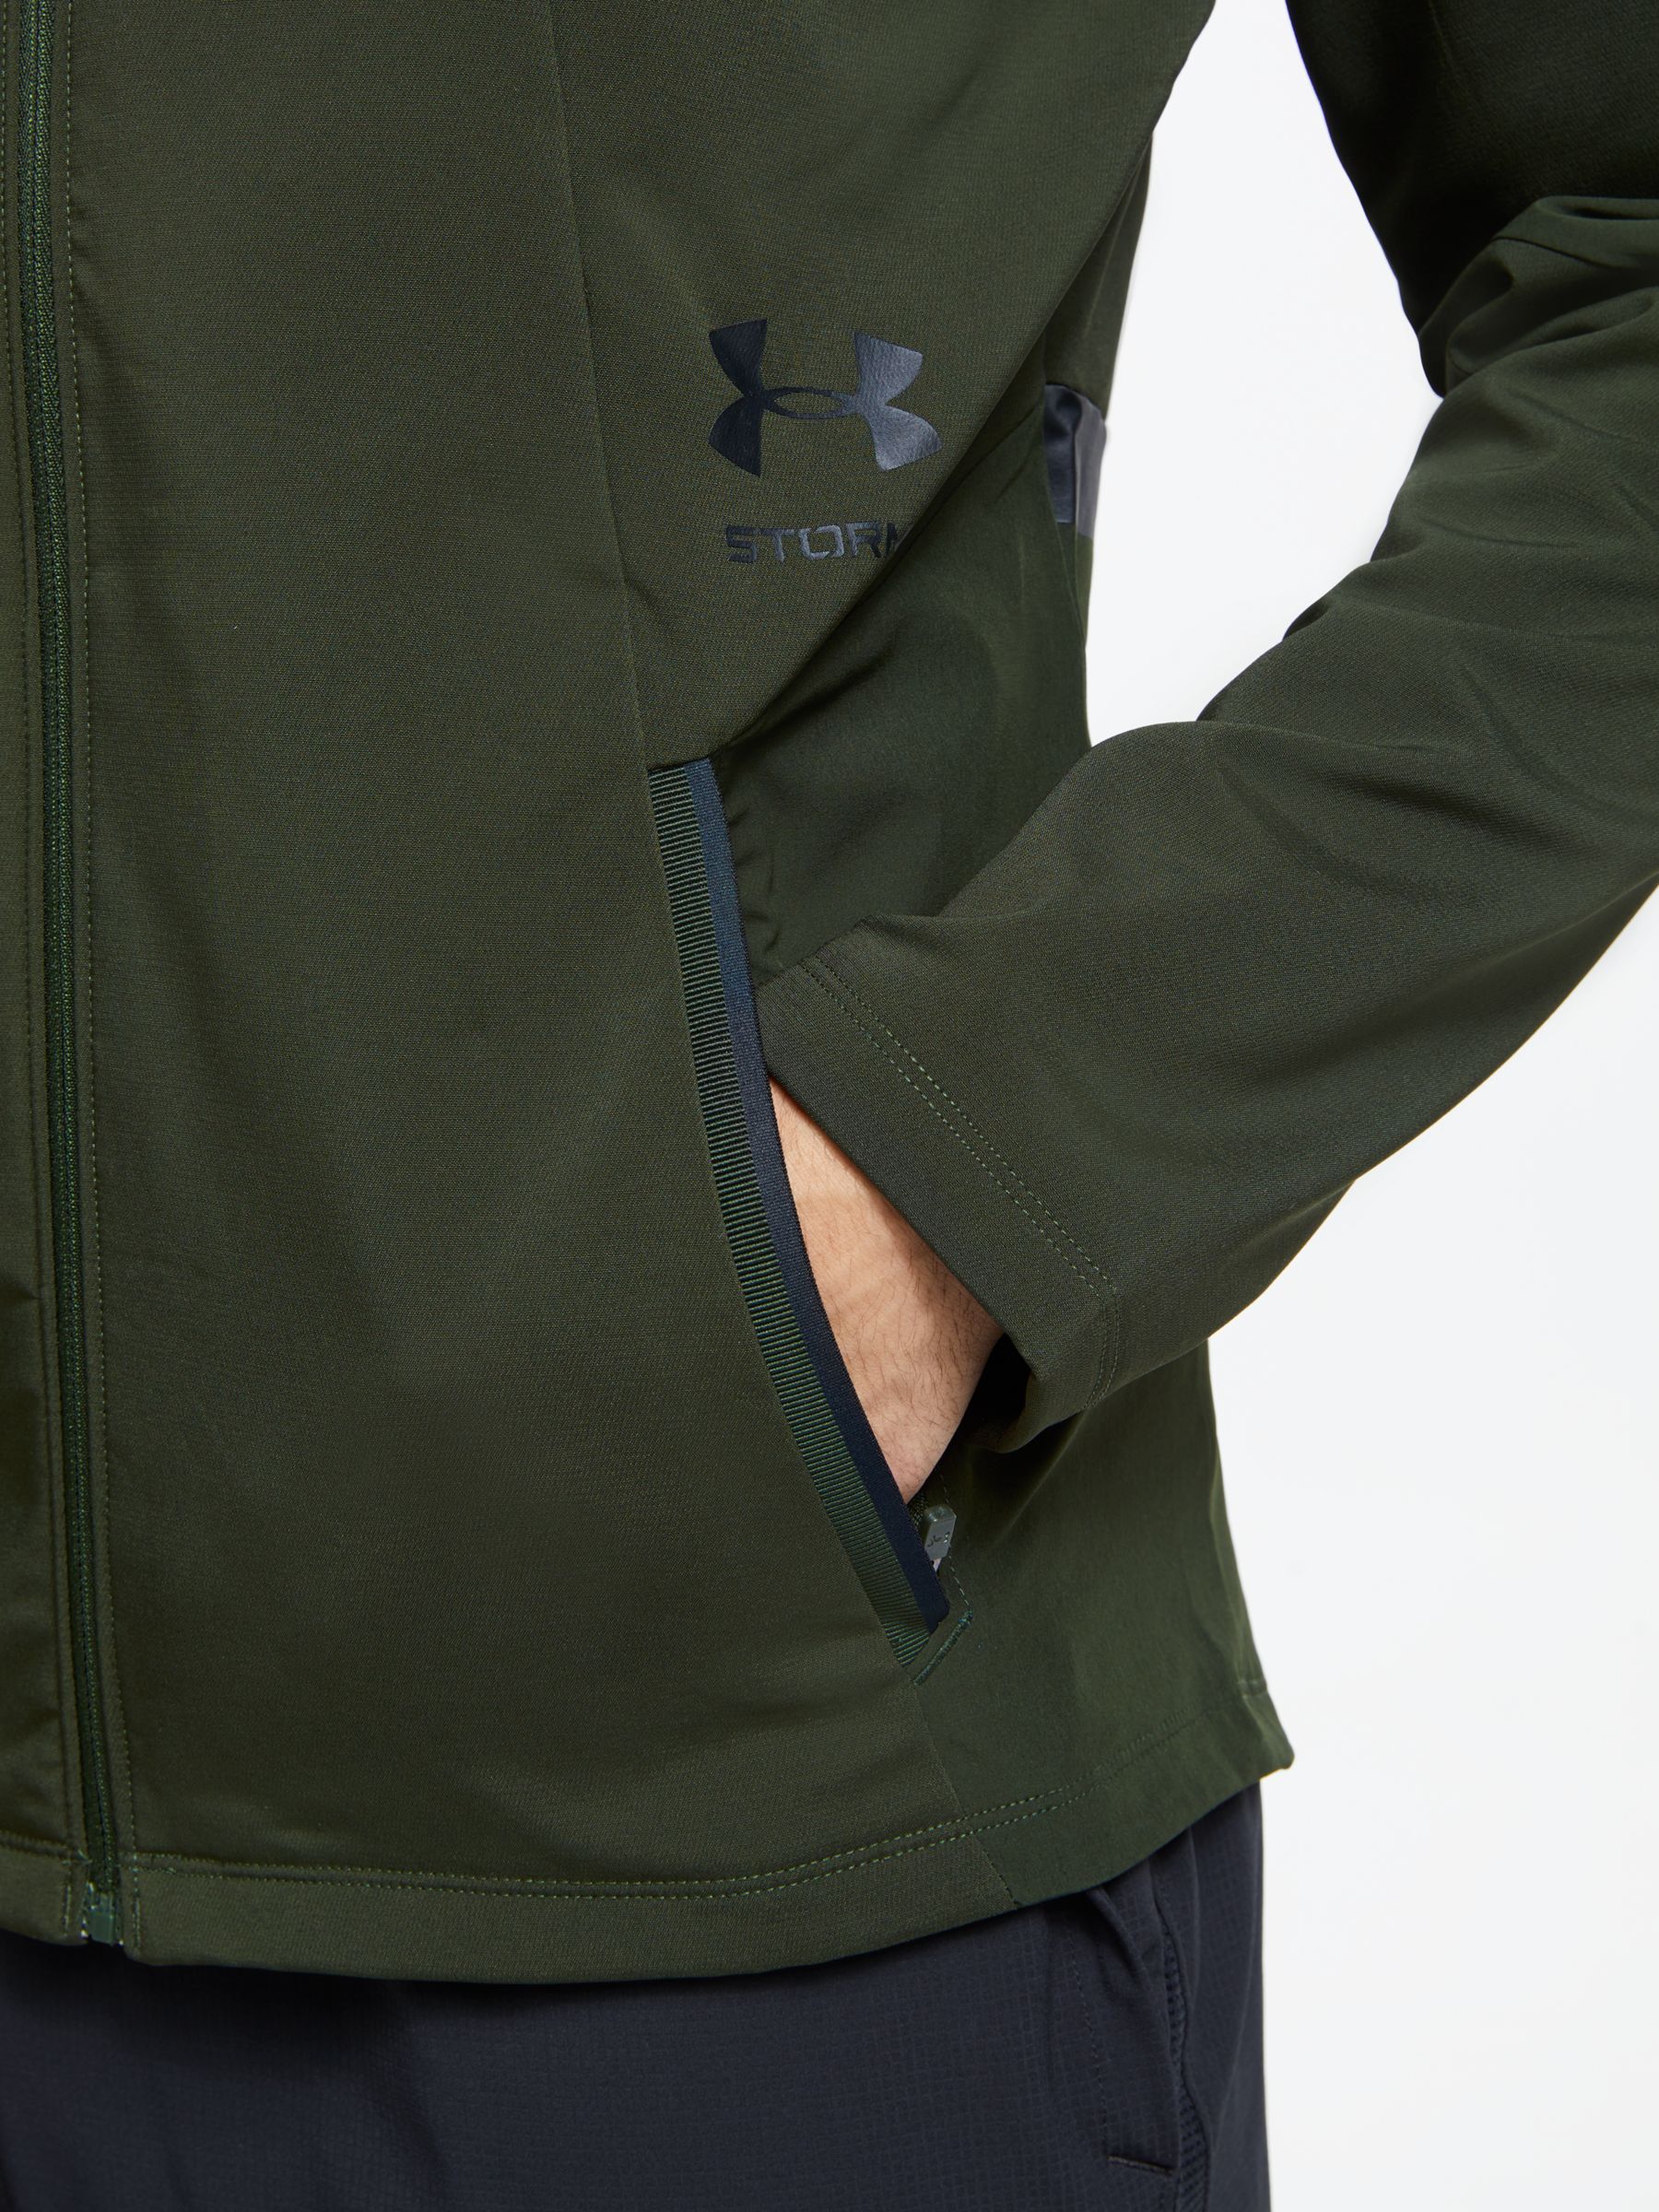 under armour storm jacket green